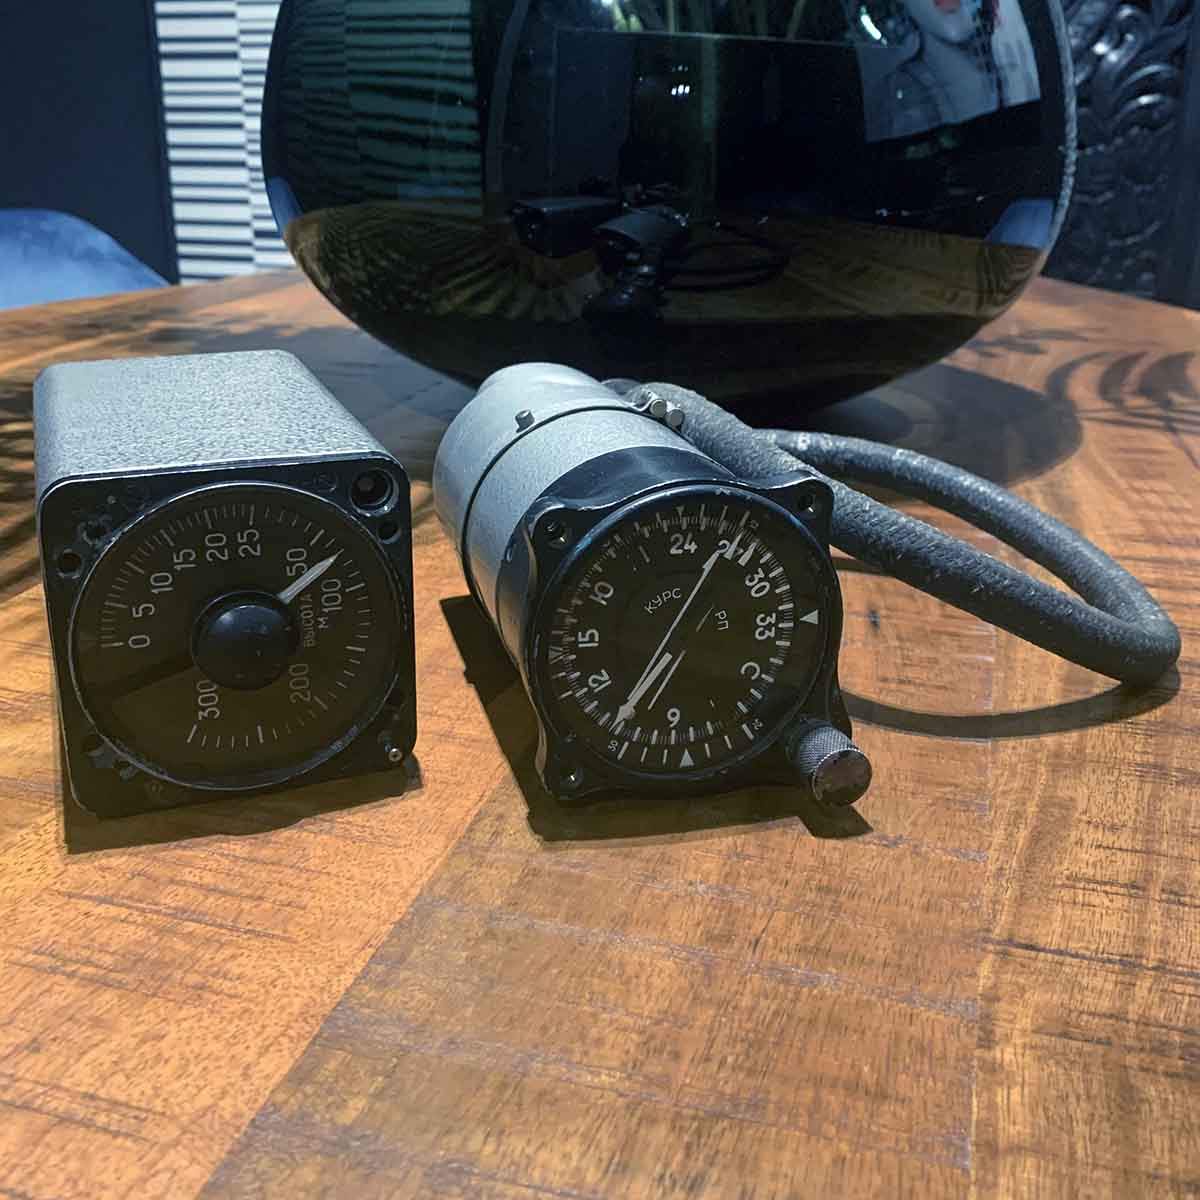 Russian military cockpit instruments on a table.